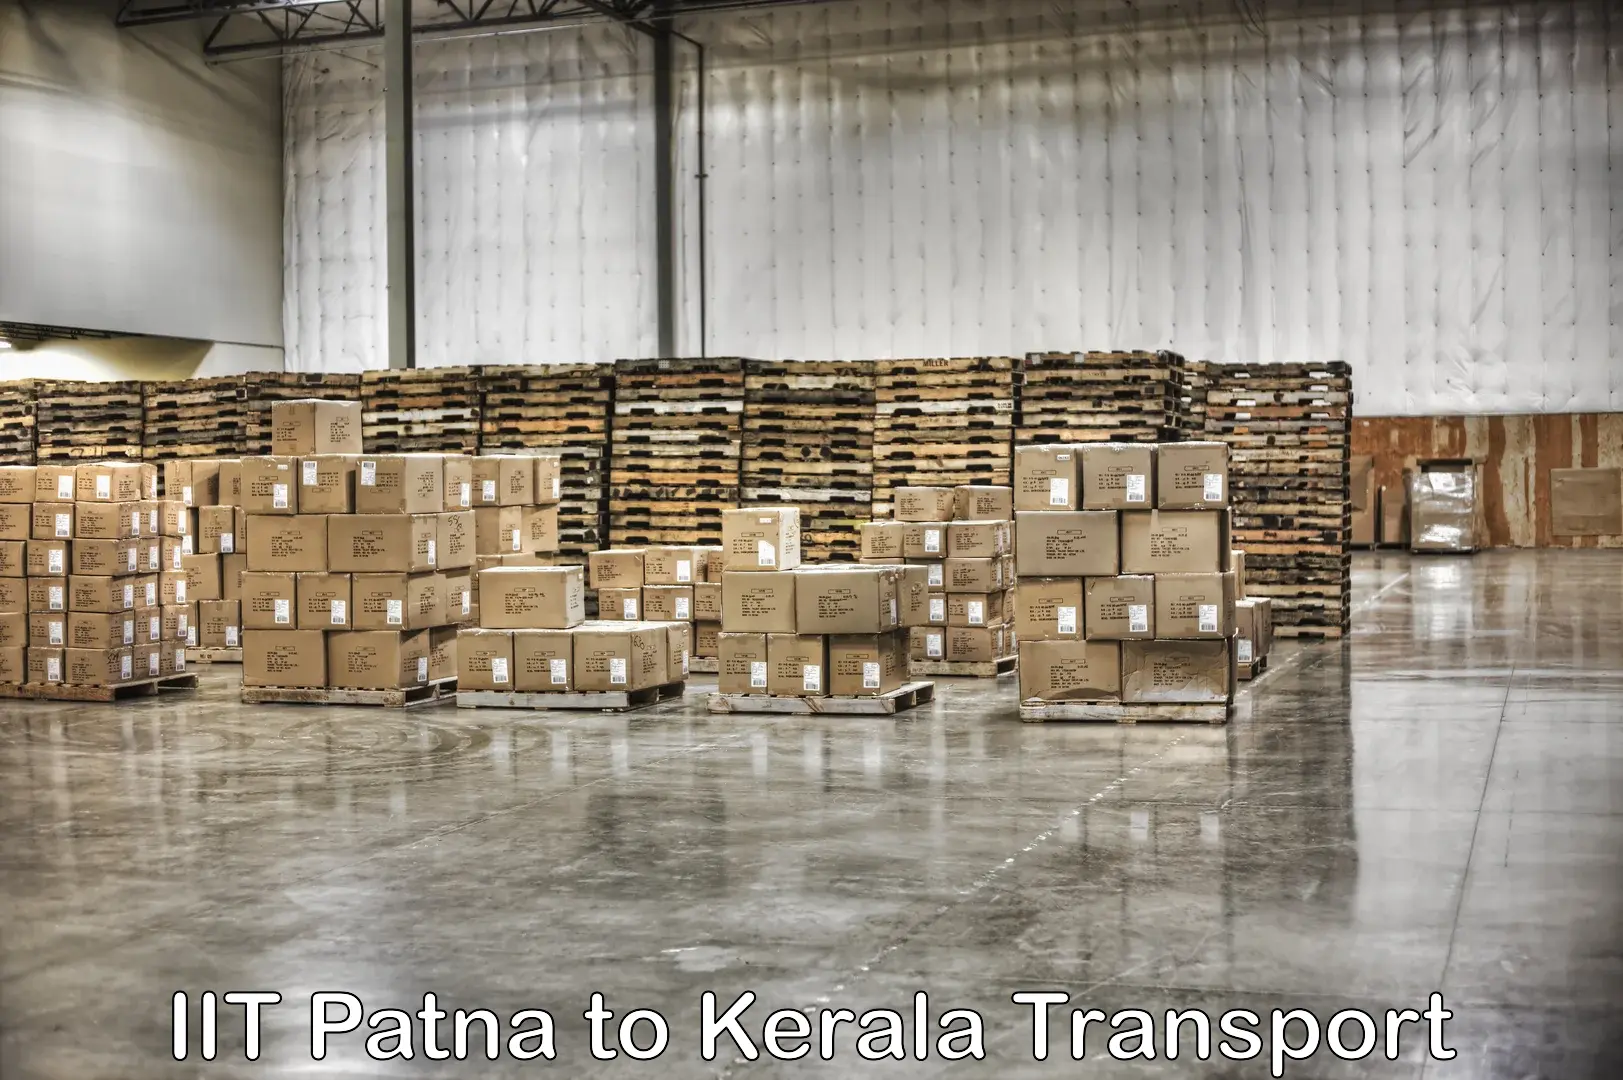 Lorry transport service IIT Patna to Thrissur